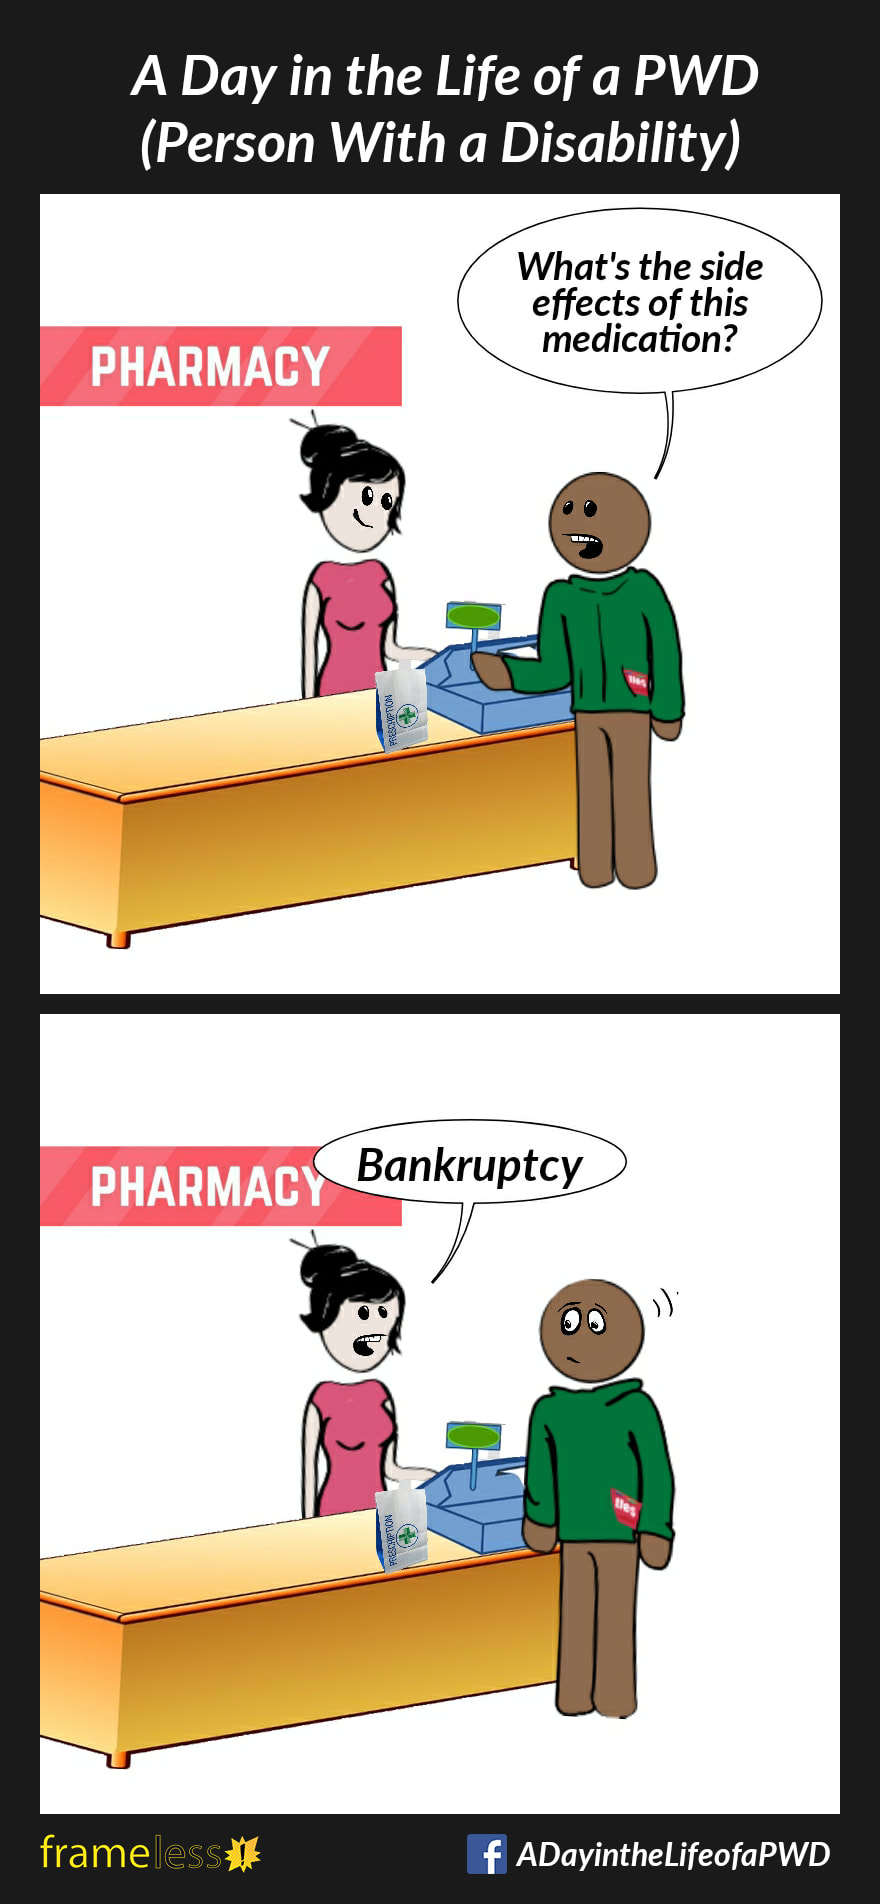 COMIC STRIP 
A Day in the Life of a PWD (Person With a Disability) 

Frame 1:
A man is at the pharmacy, picking up a new medication.
MAN: What's the side effects of this medication?

Frame 2:
PHARMACIST: Bankruptcy 